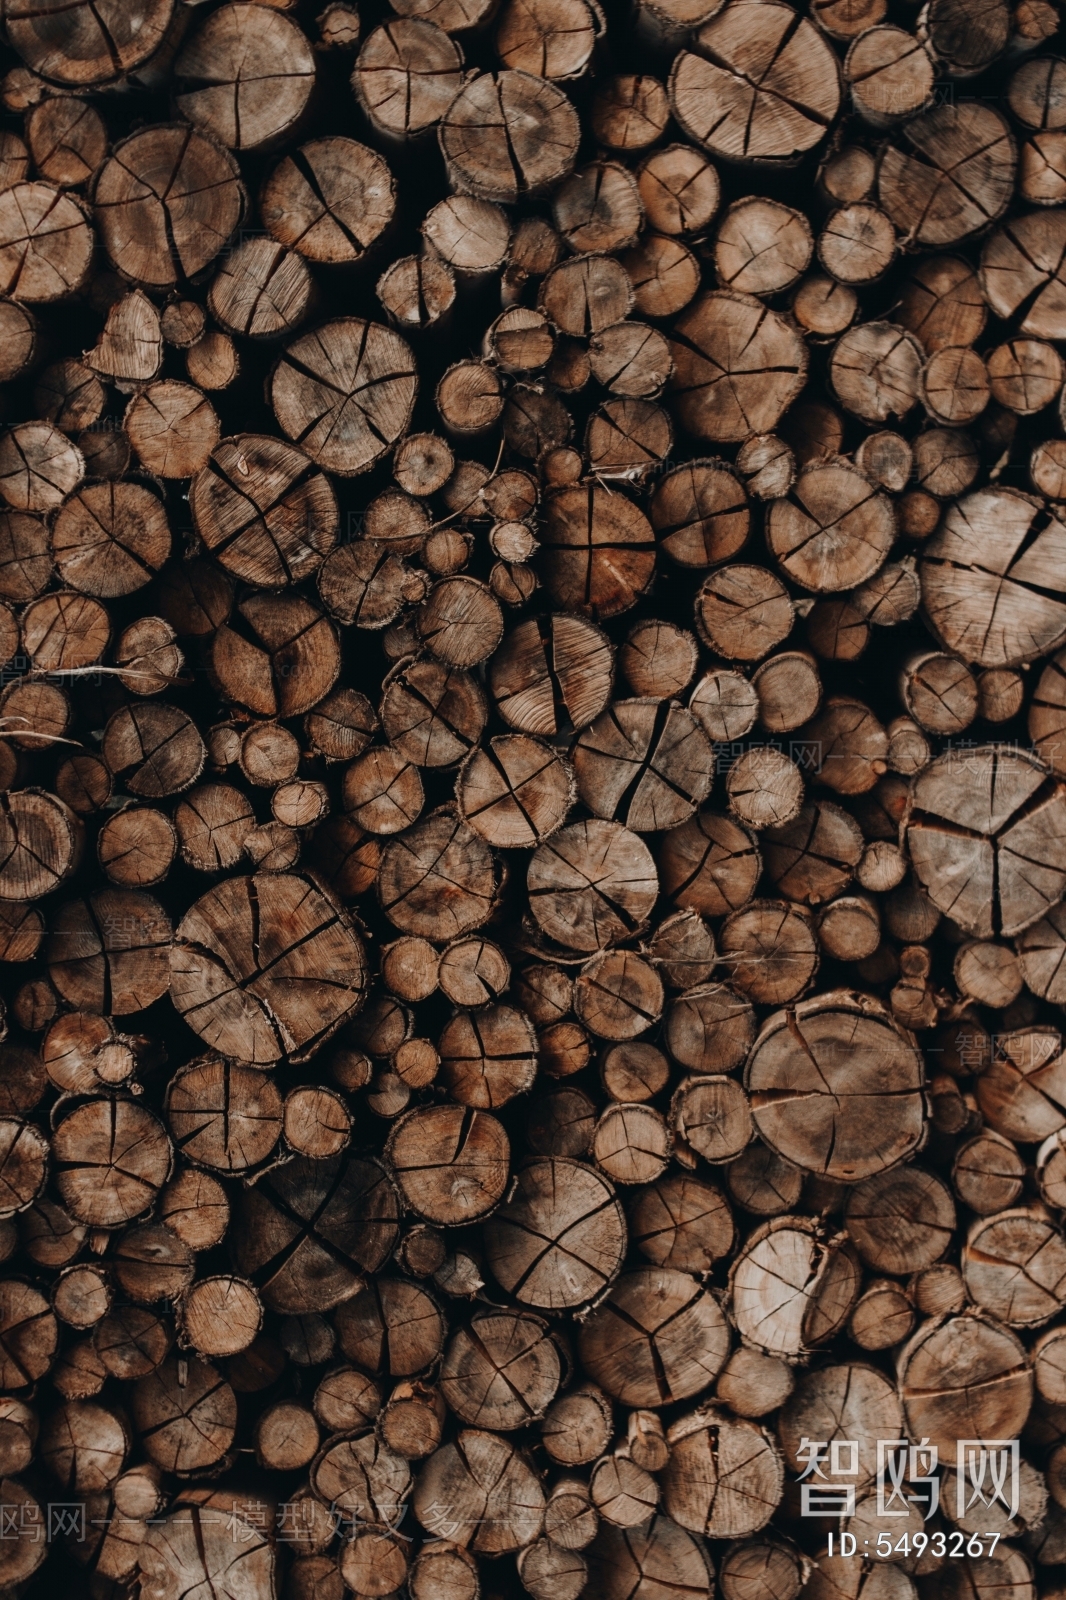 Other Wood Textures